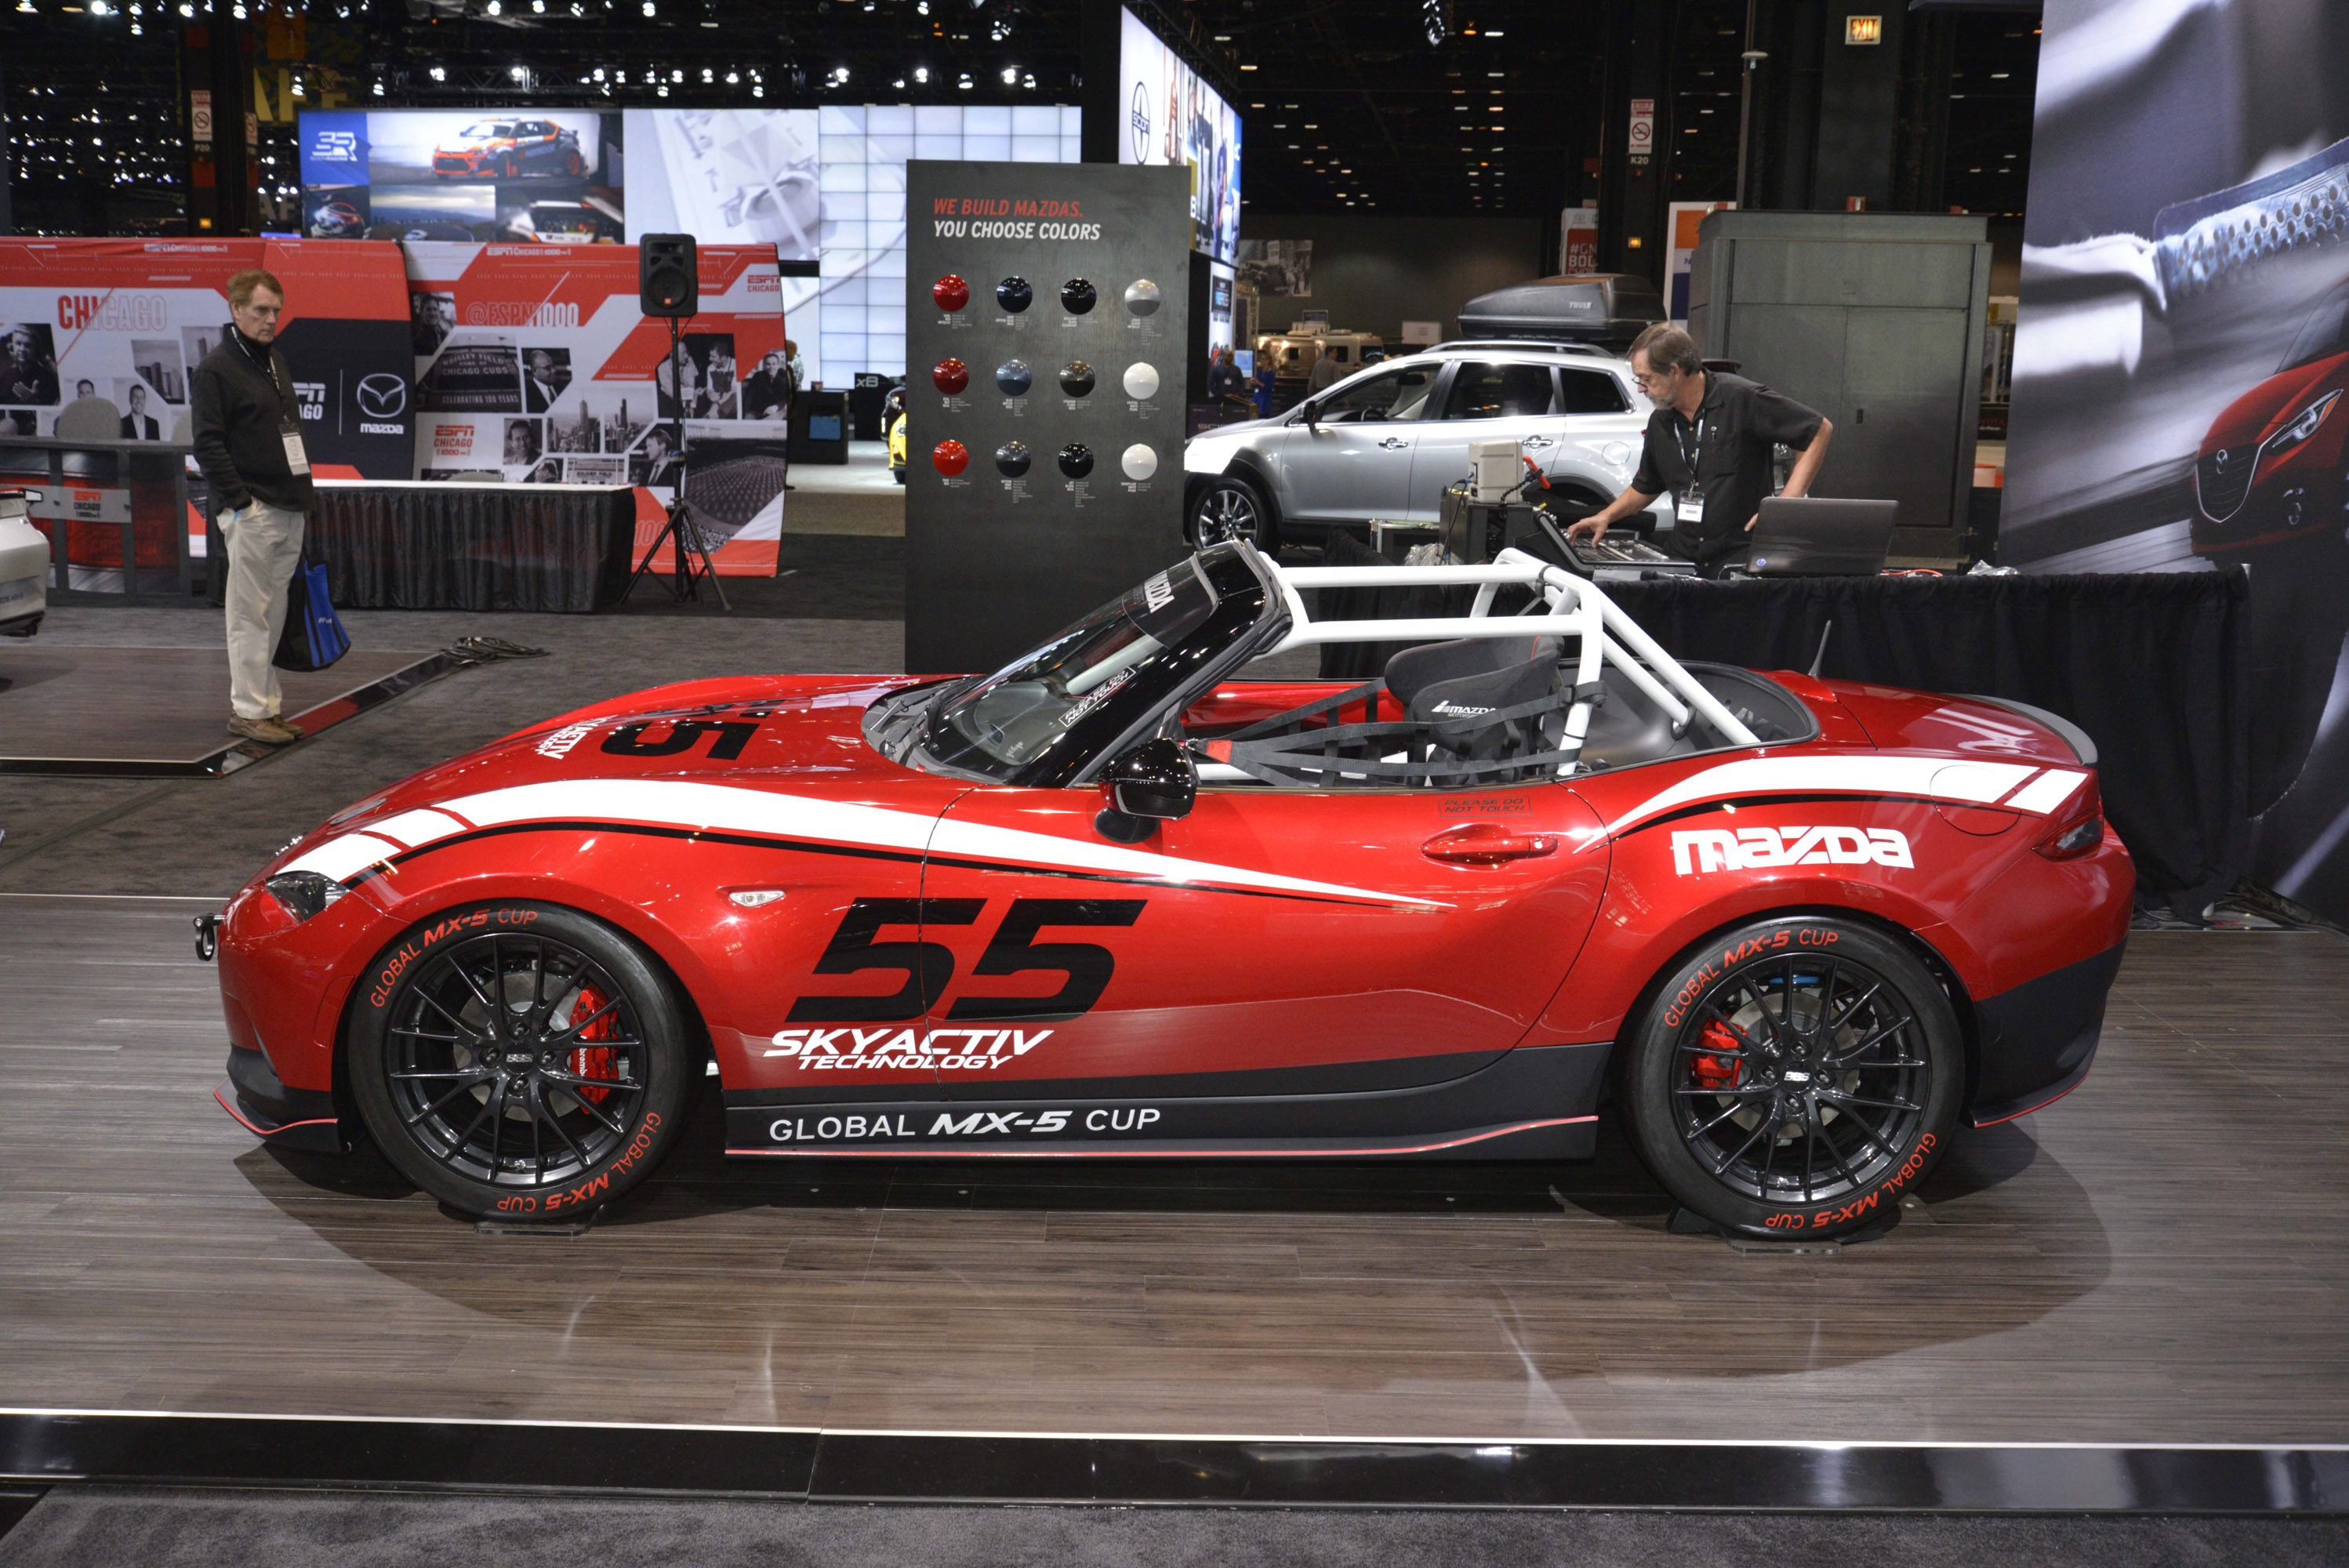 Mazda 2016 Global MX-5 Cup Race Car Chicago